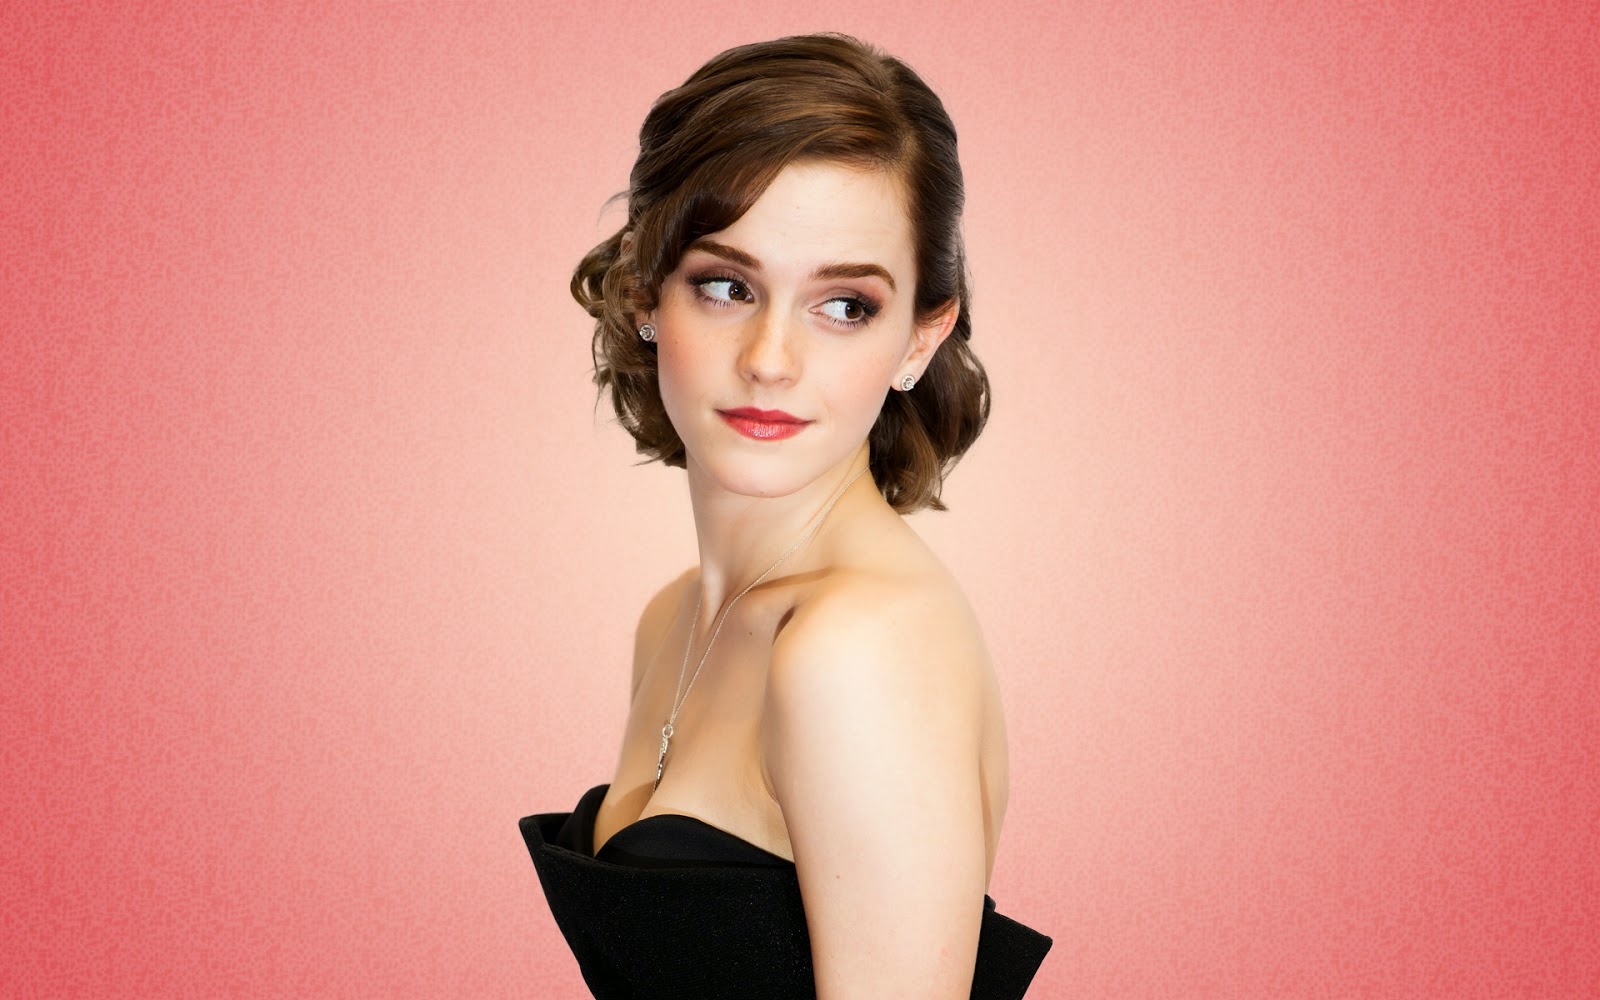 Emma Watson Cast As Belle In New Beauty and The Beast Film photo